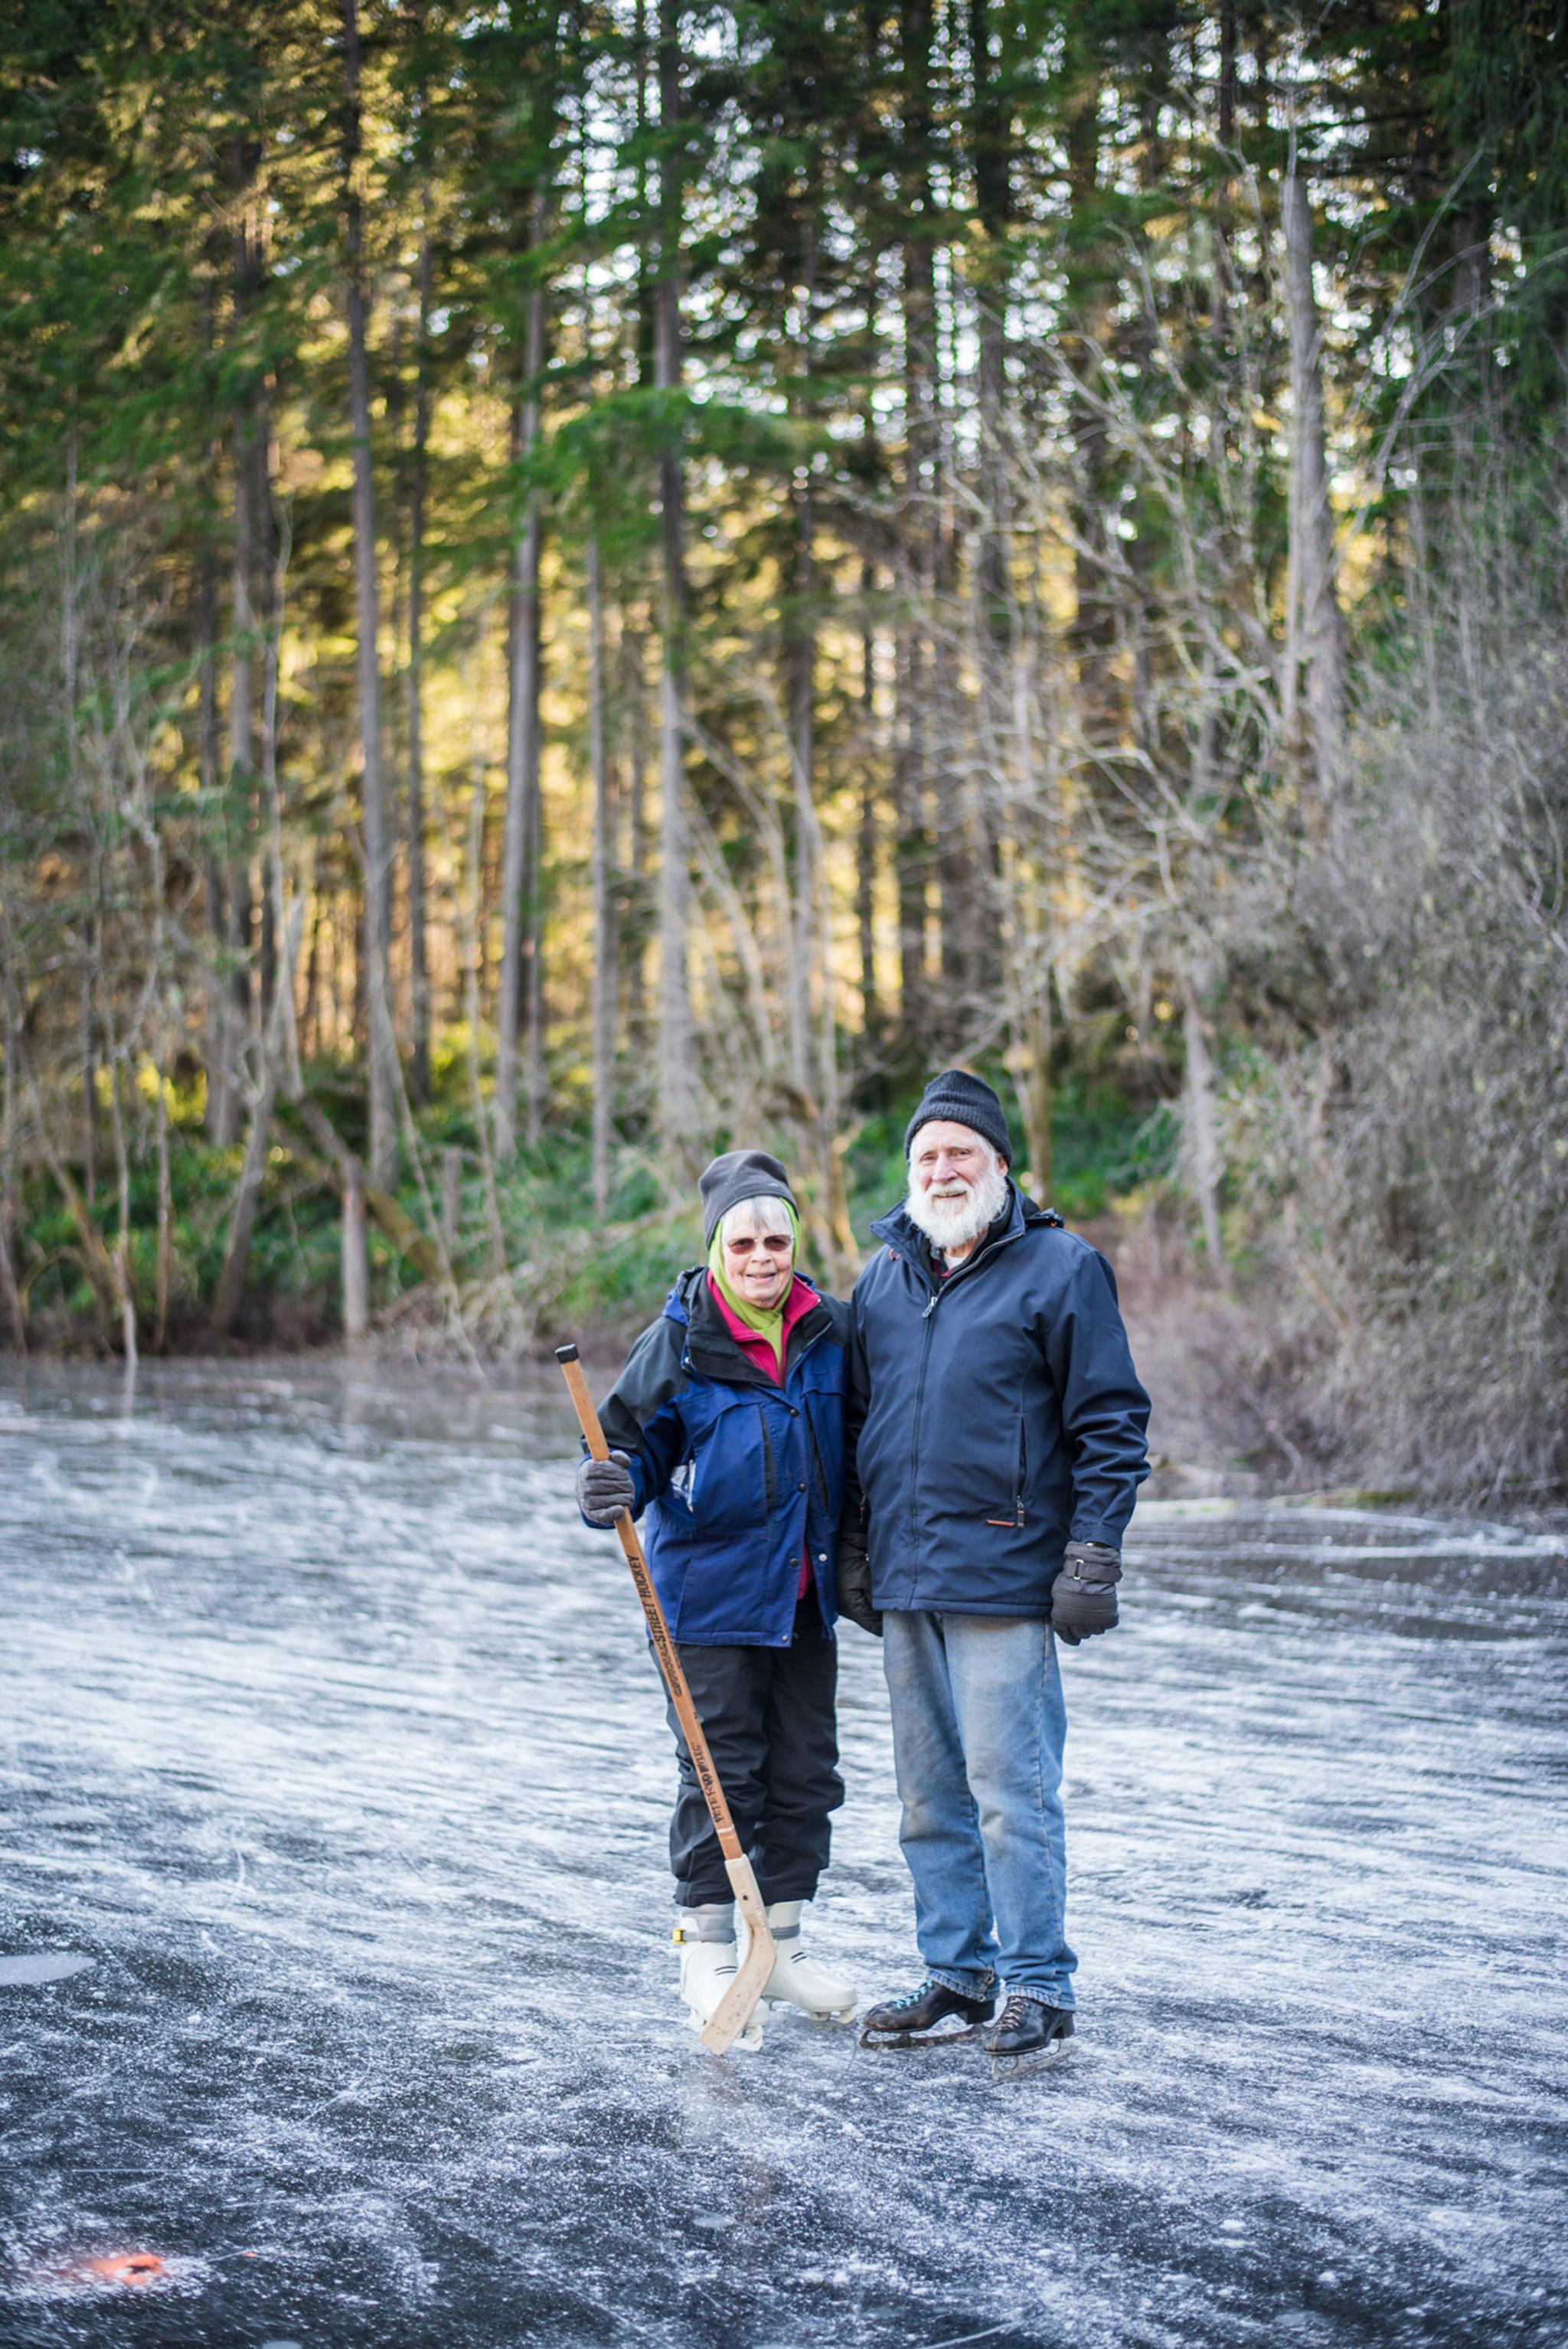 Gary and Linda Peterson — the island couple who has been providing ice skates for islanders when the pond freezes for years — stand on Fisher Pond. (Cassie Bergman Photo)